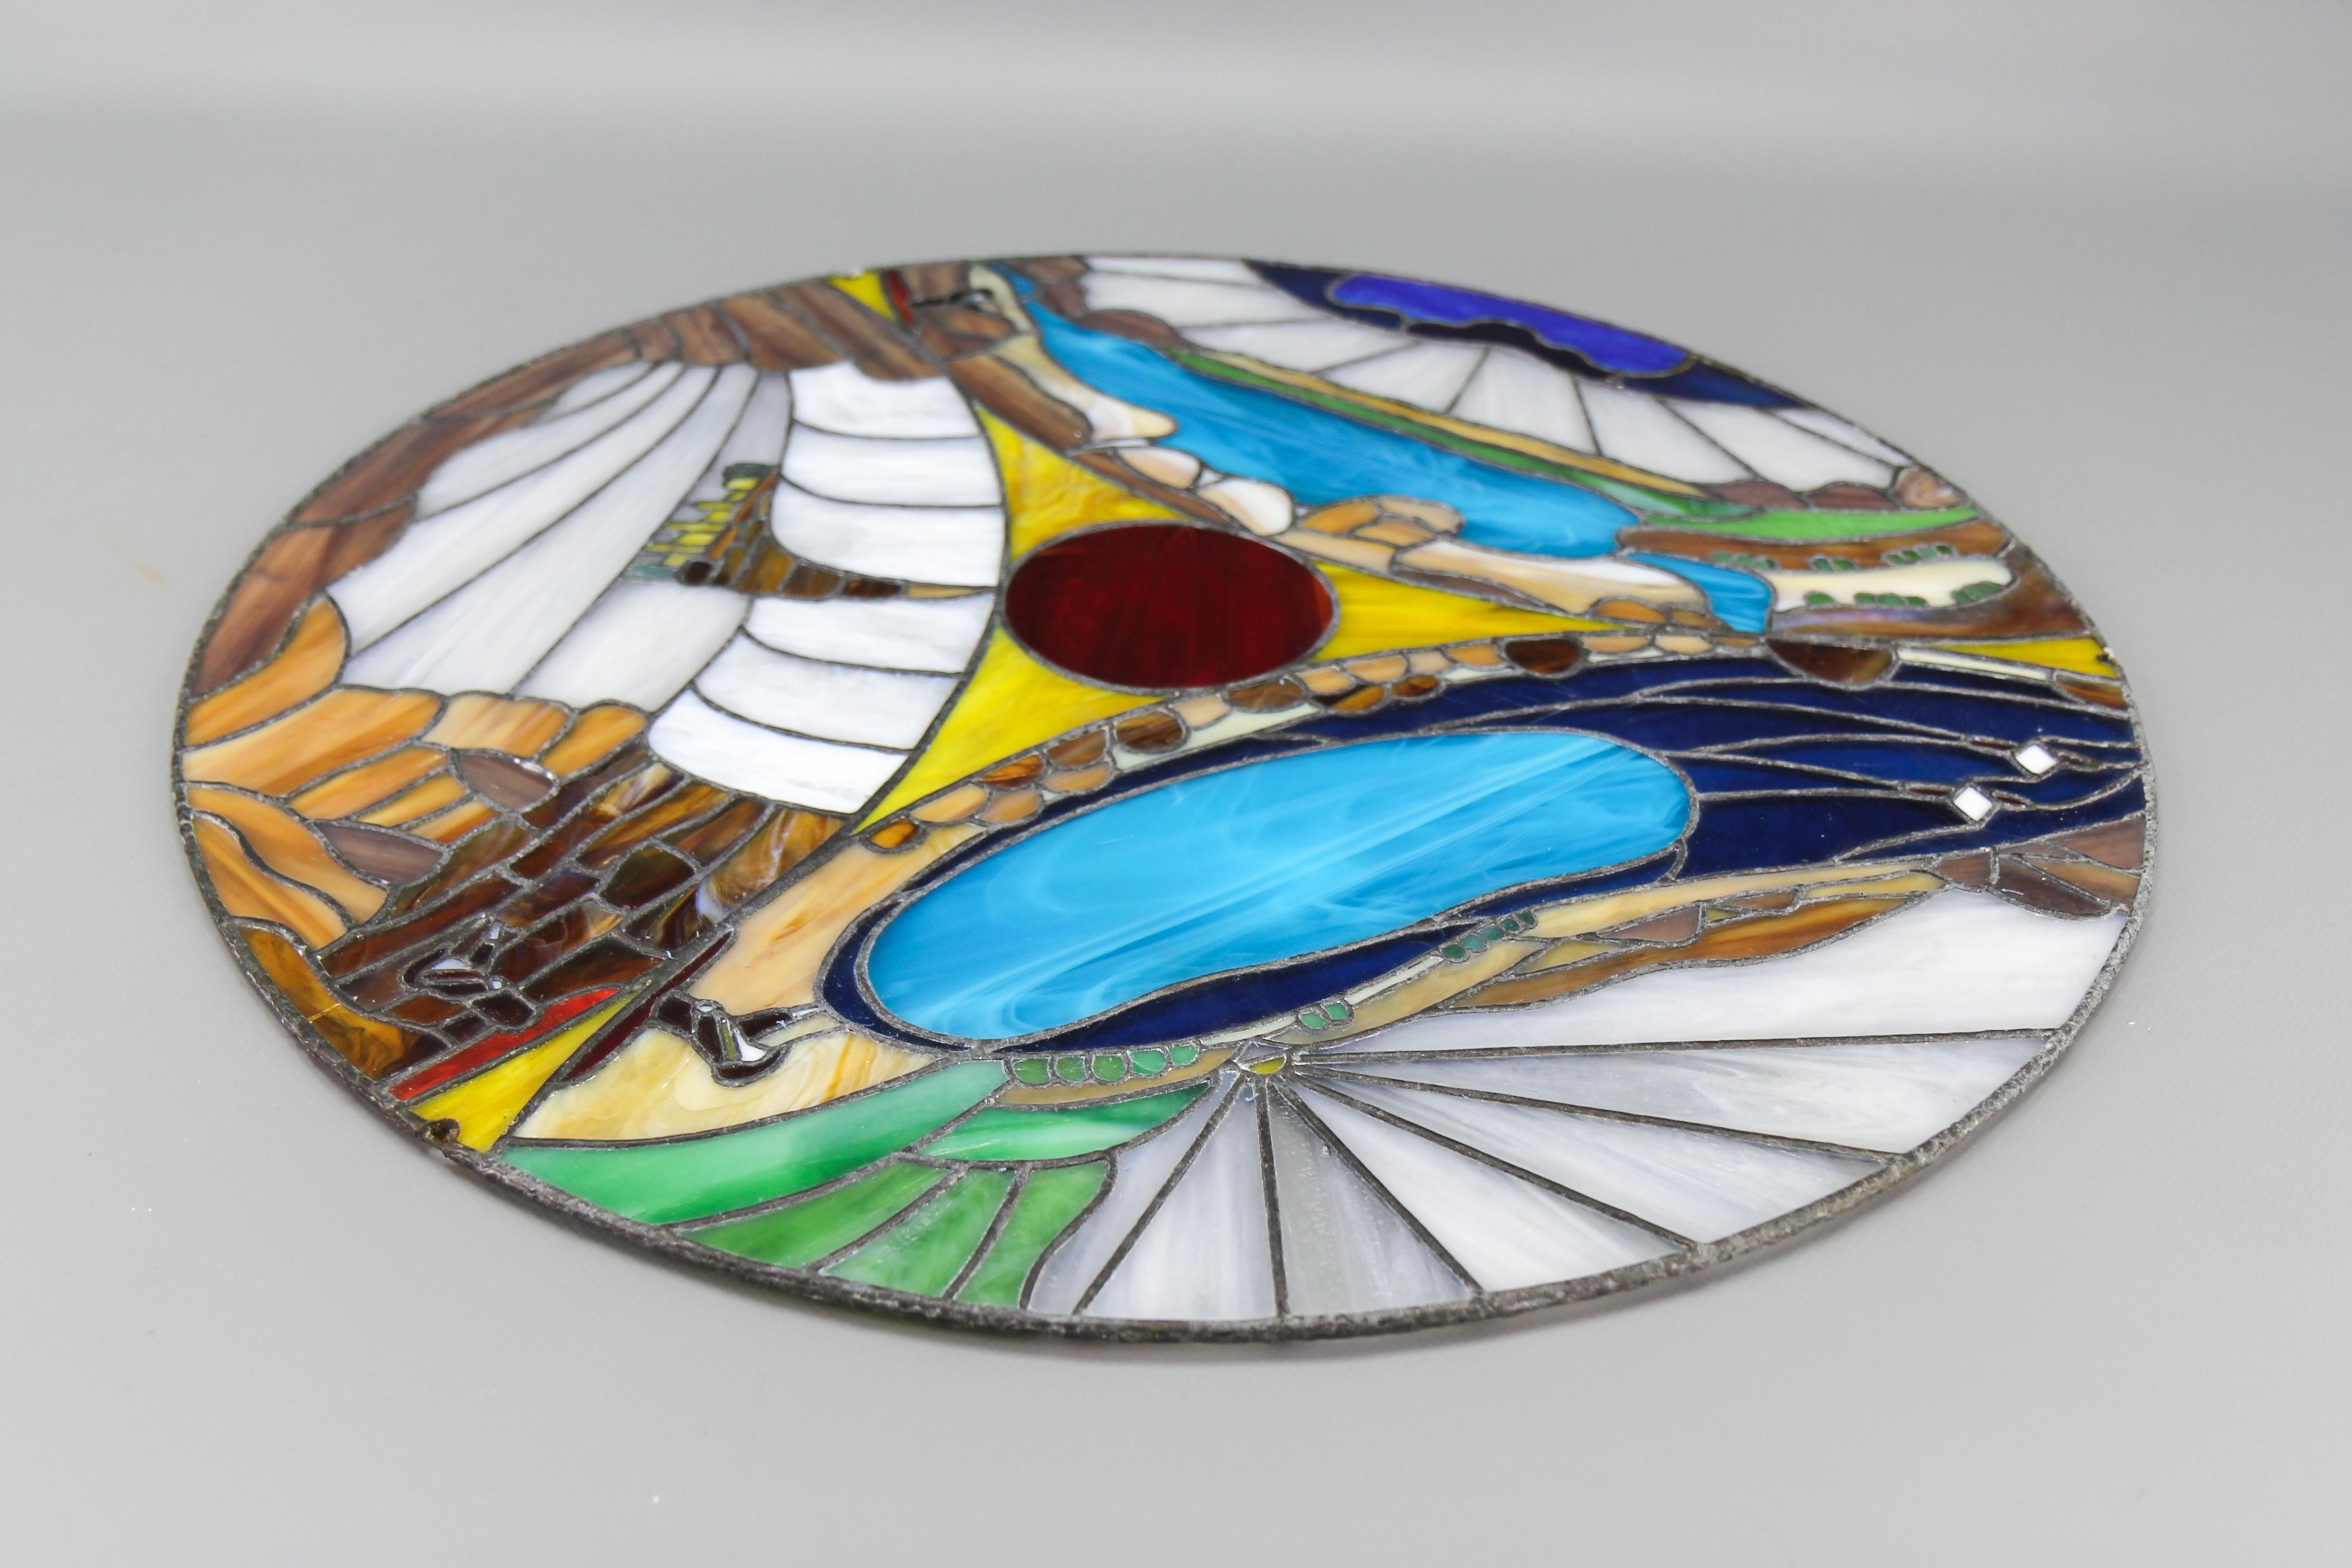 Round Polychrome Tiffany-Style Stained Glass Window Panel, 1970s For Sale 4